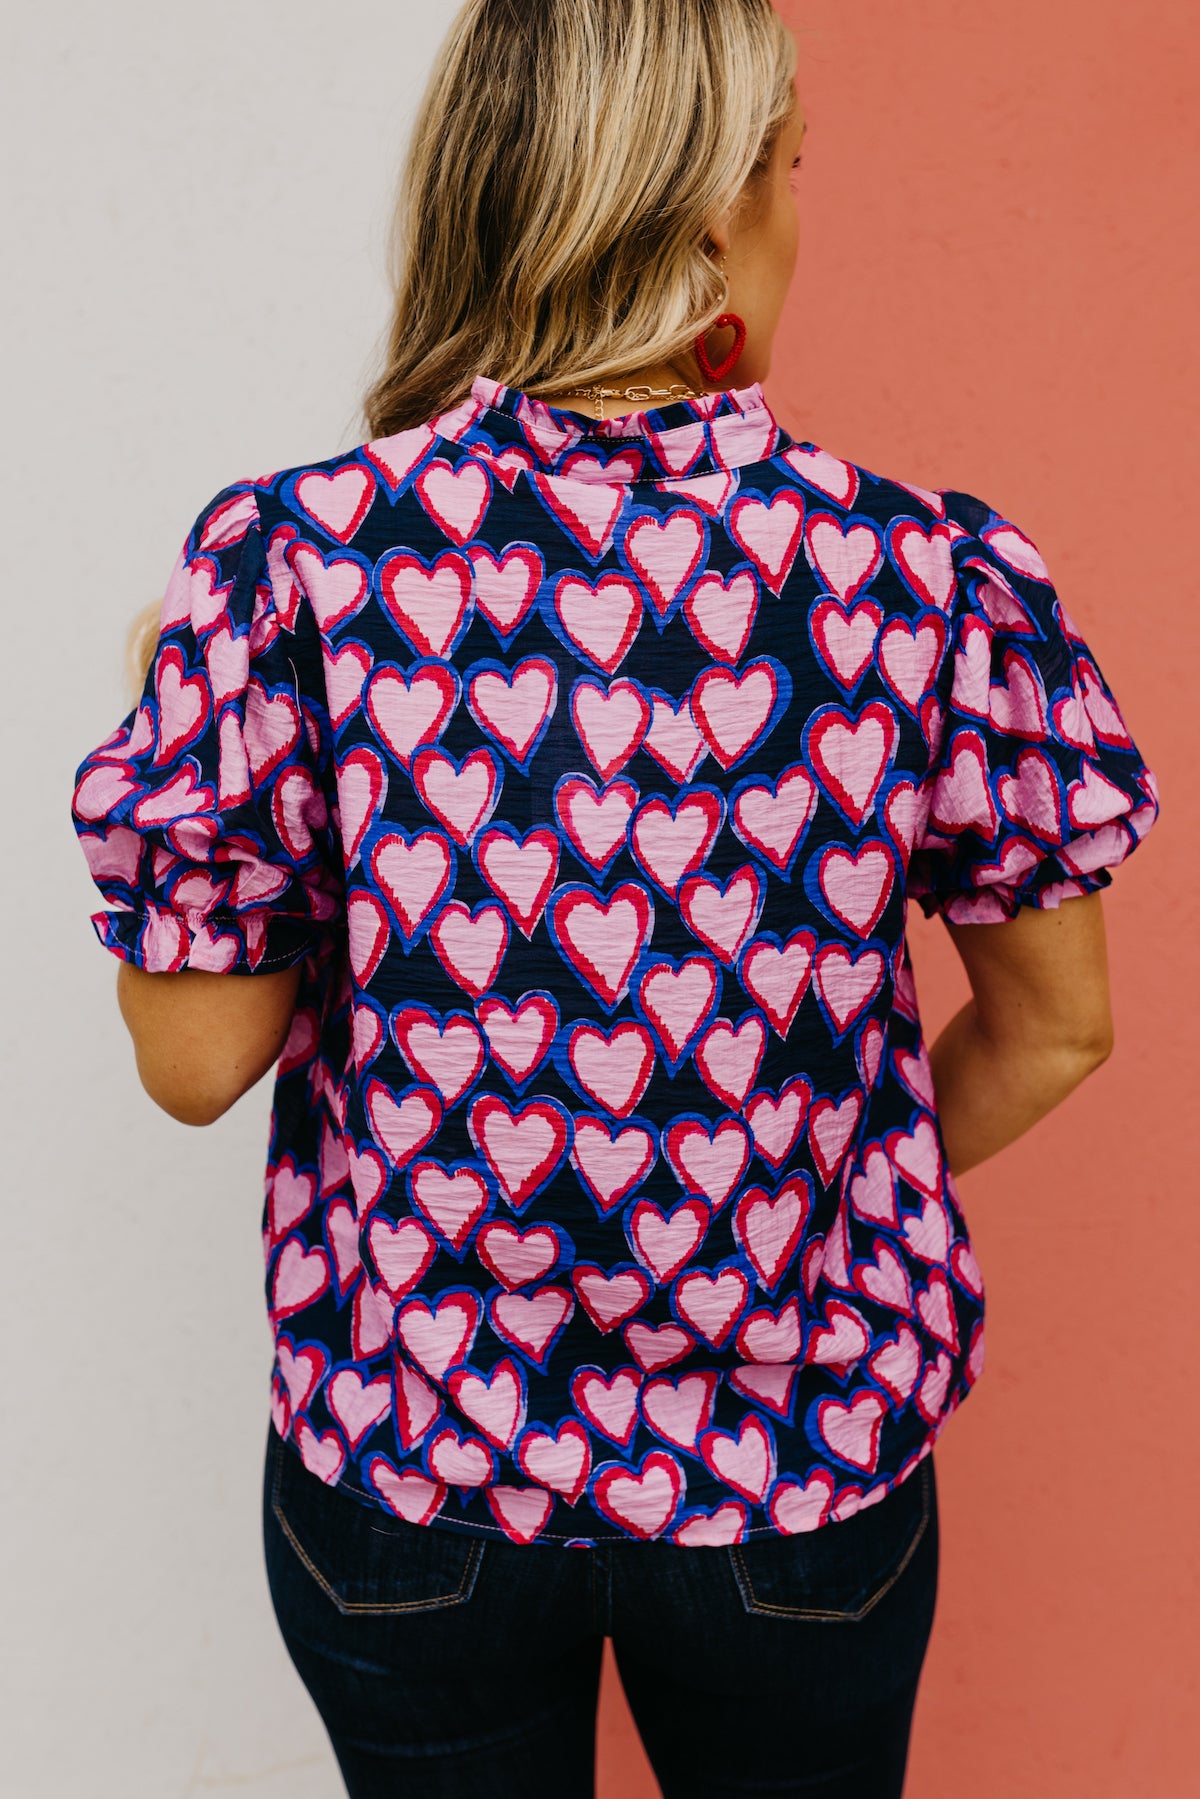 The Abraham Heart Pattern Top